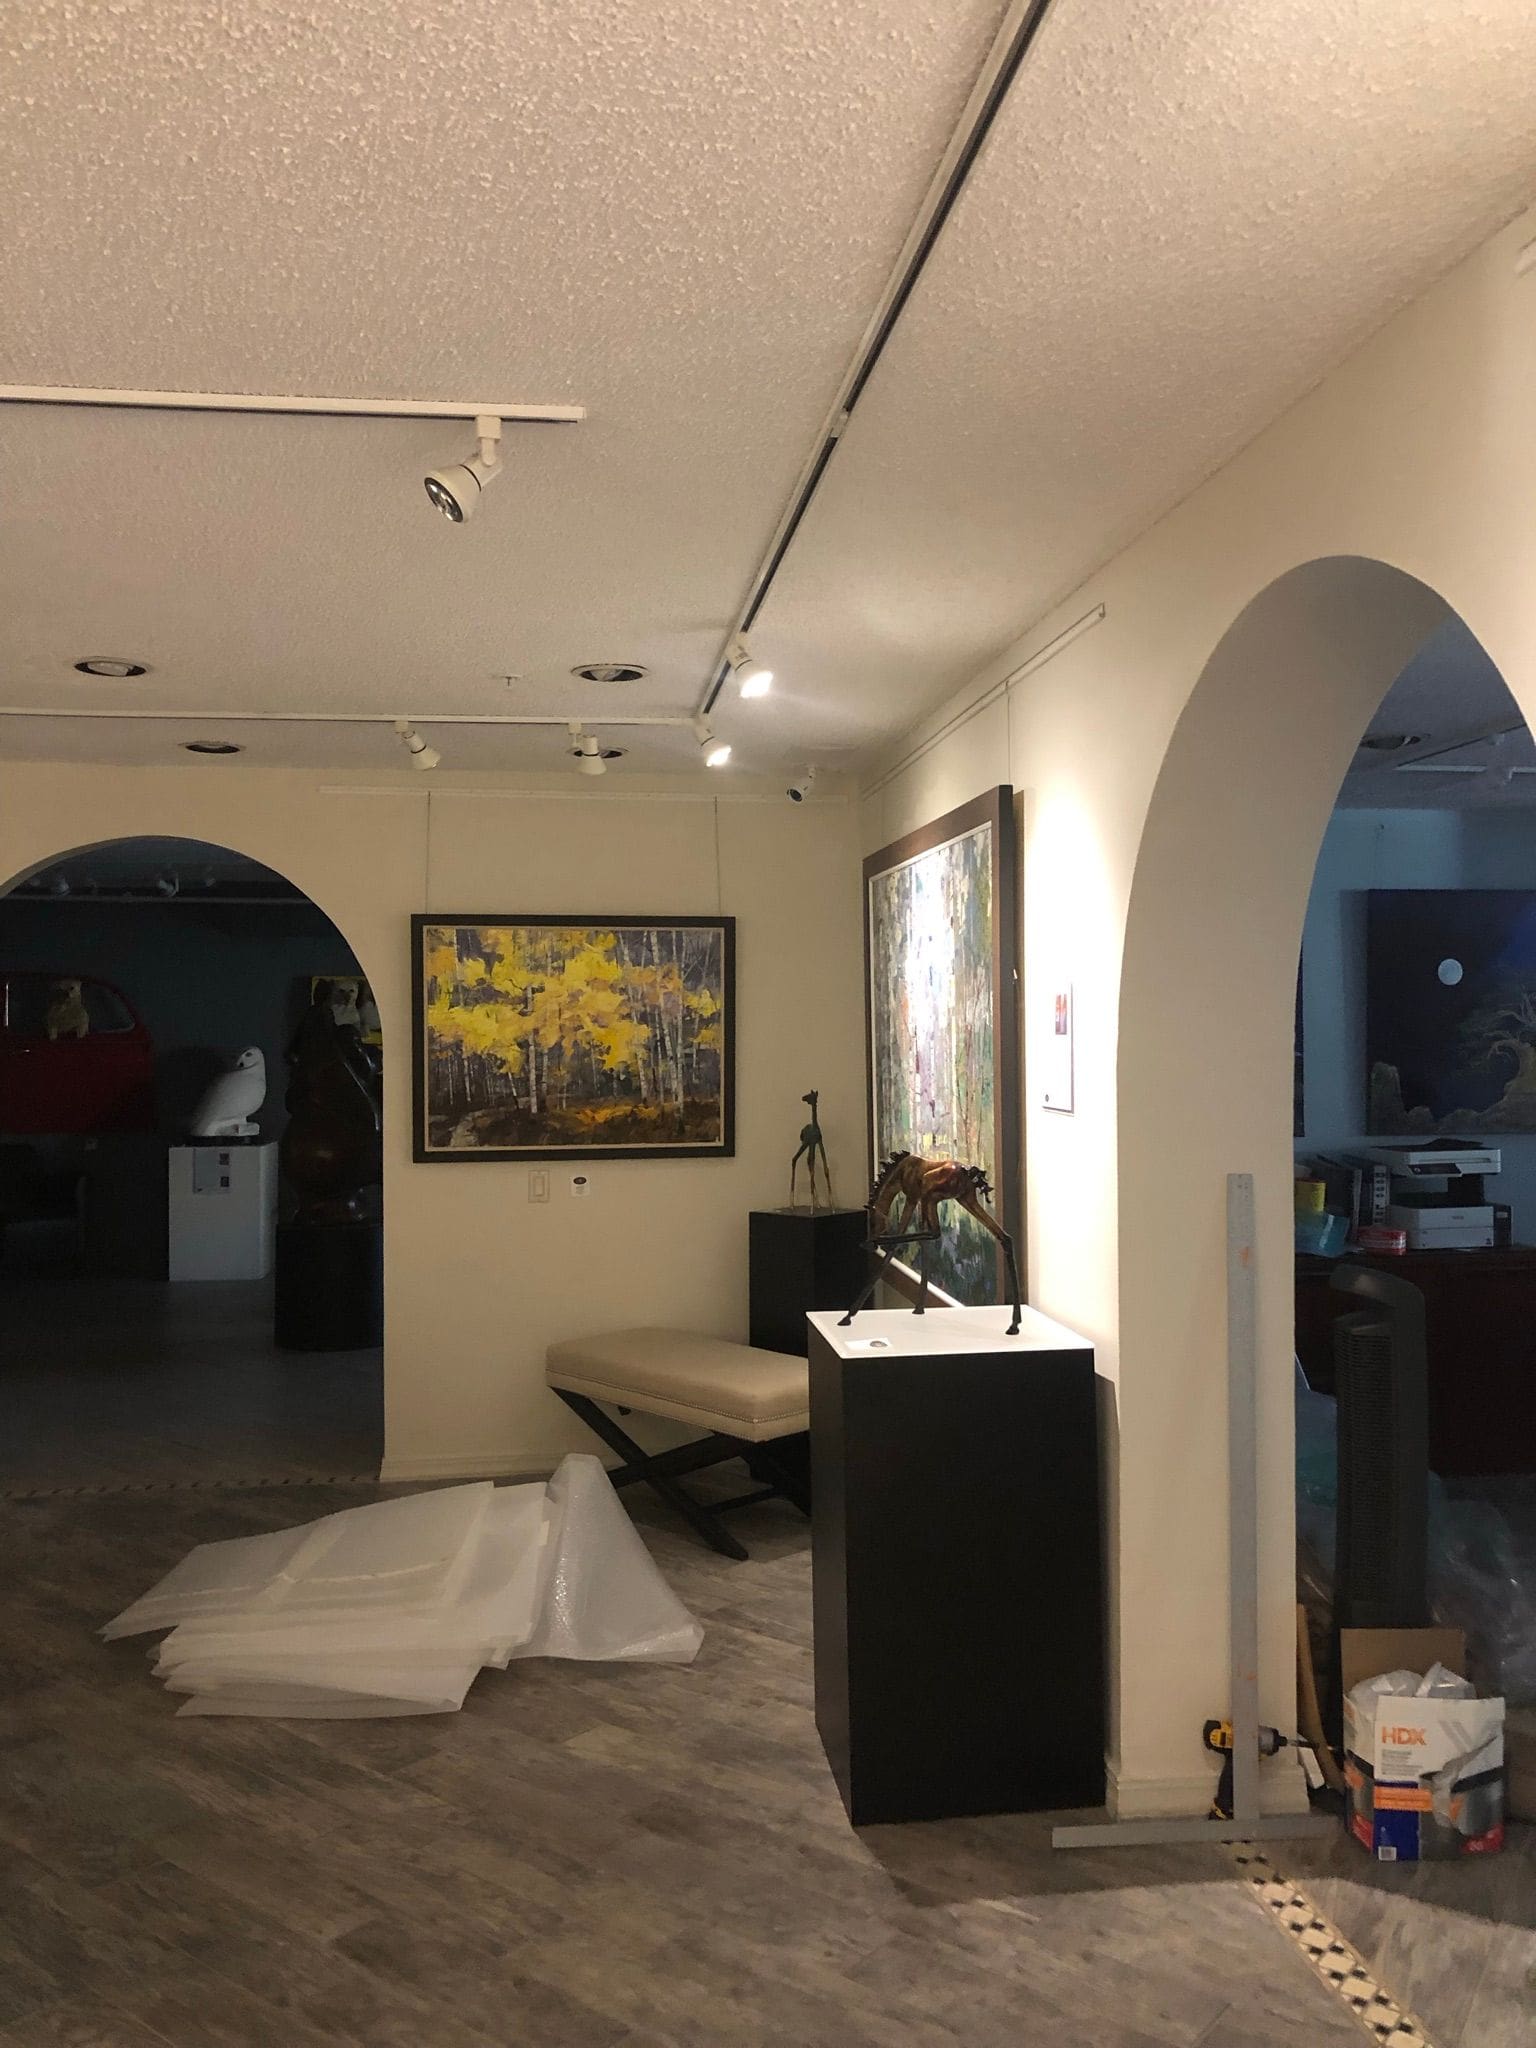 Preparation Work in Place for Remodel of Art Gallery.